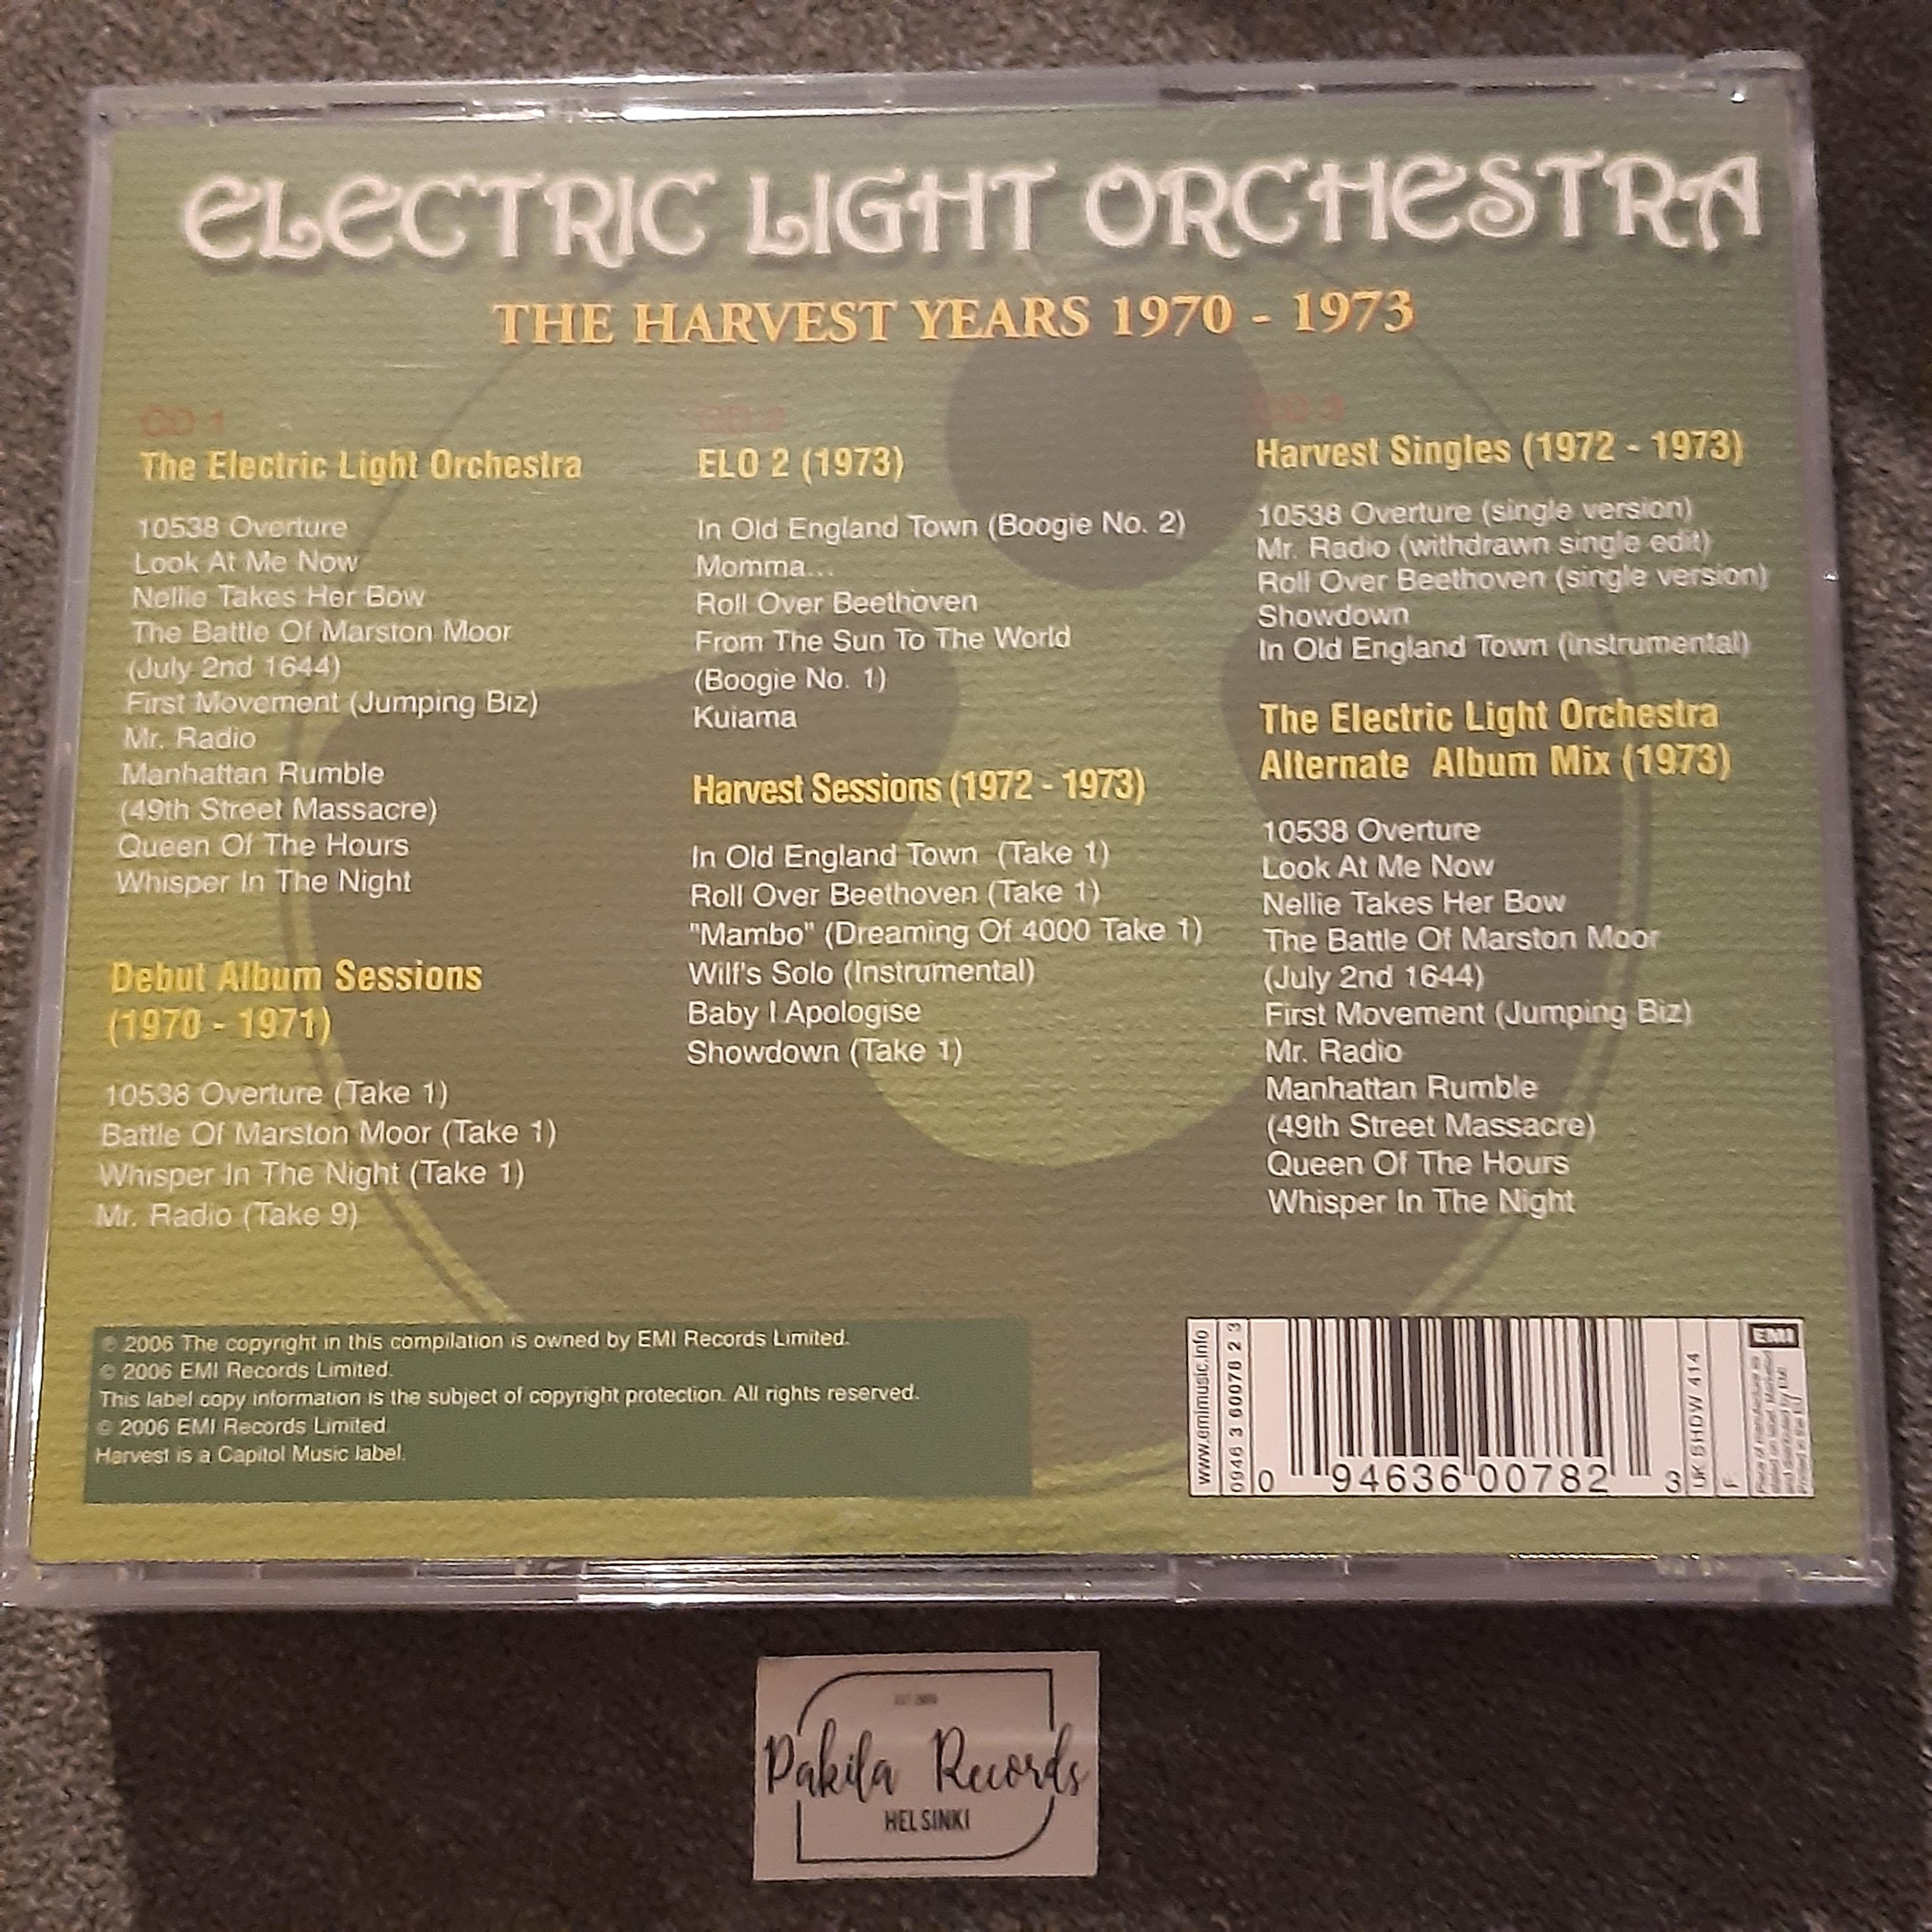 Electric Light Orchestra - The Harvest Years 1970-1973 - 3 CD (käytetty)